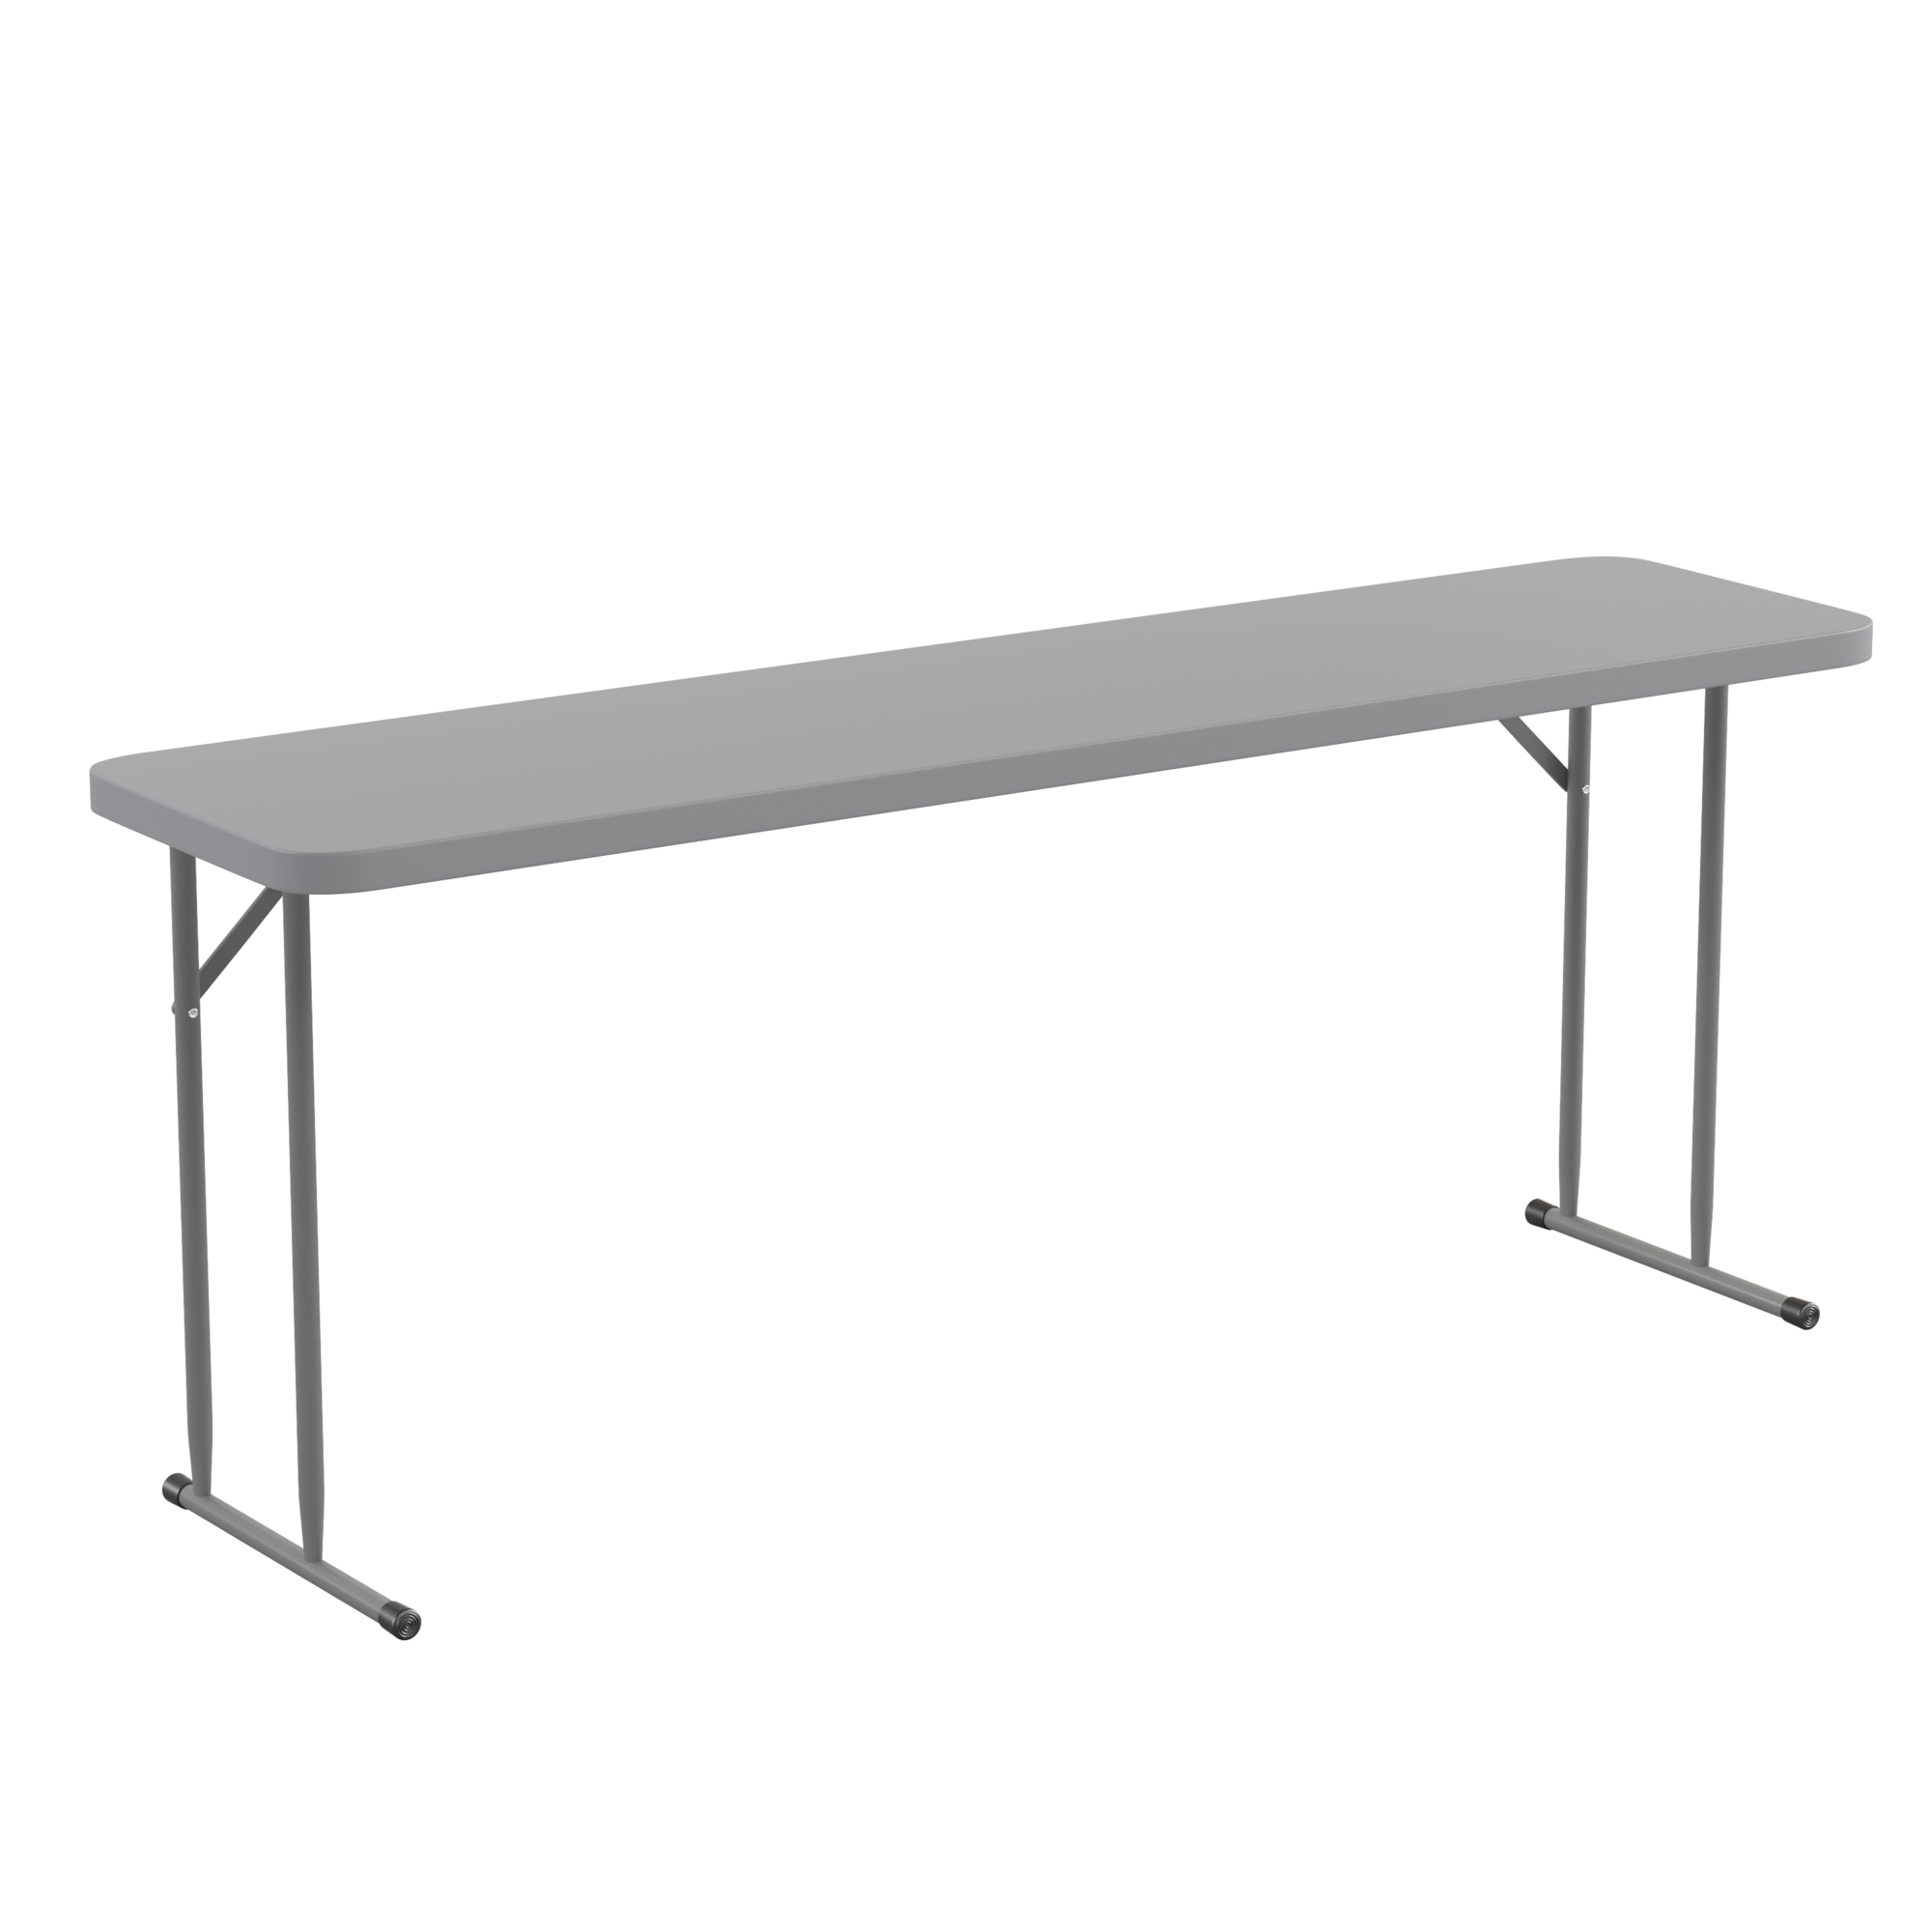 Flash Furniture, 6ft. Gray Plastic Folding Training Table, Height 29 in, Width 18 in, Length 70.8 in, Model RB1872GY